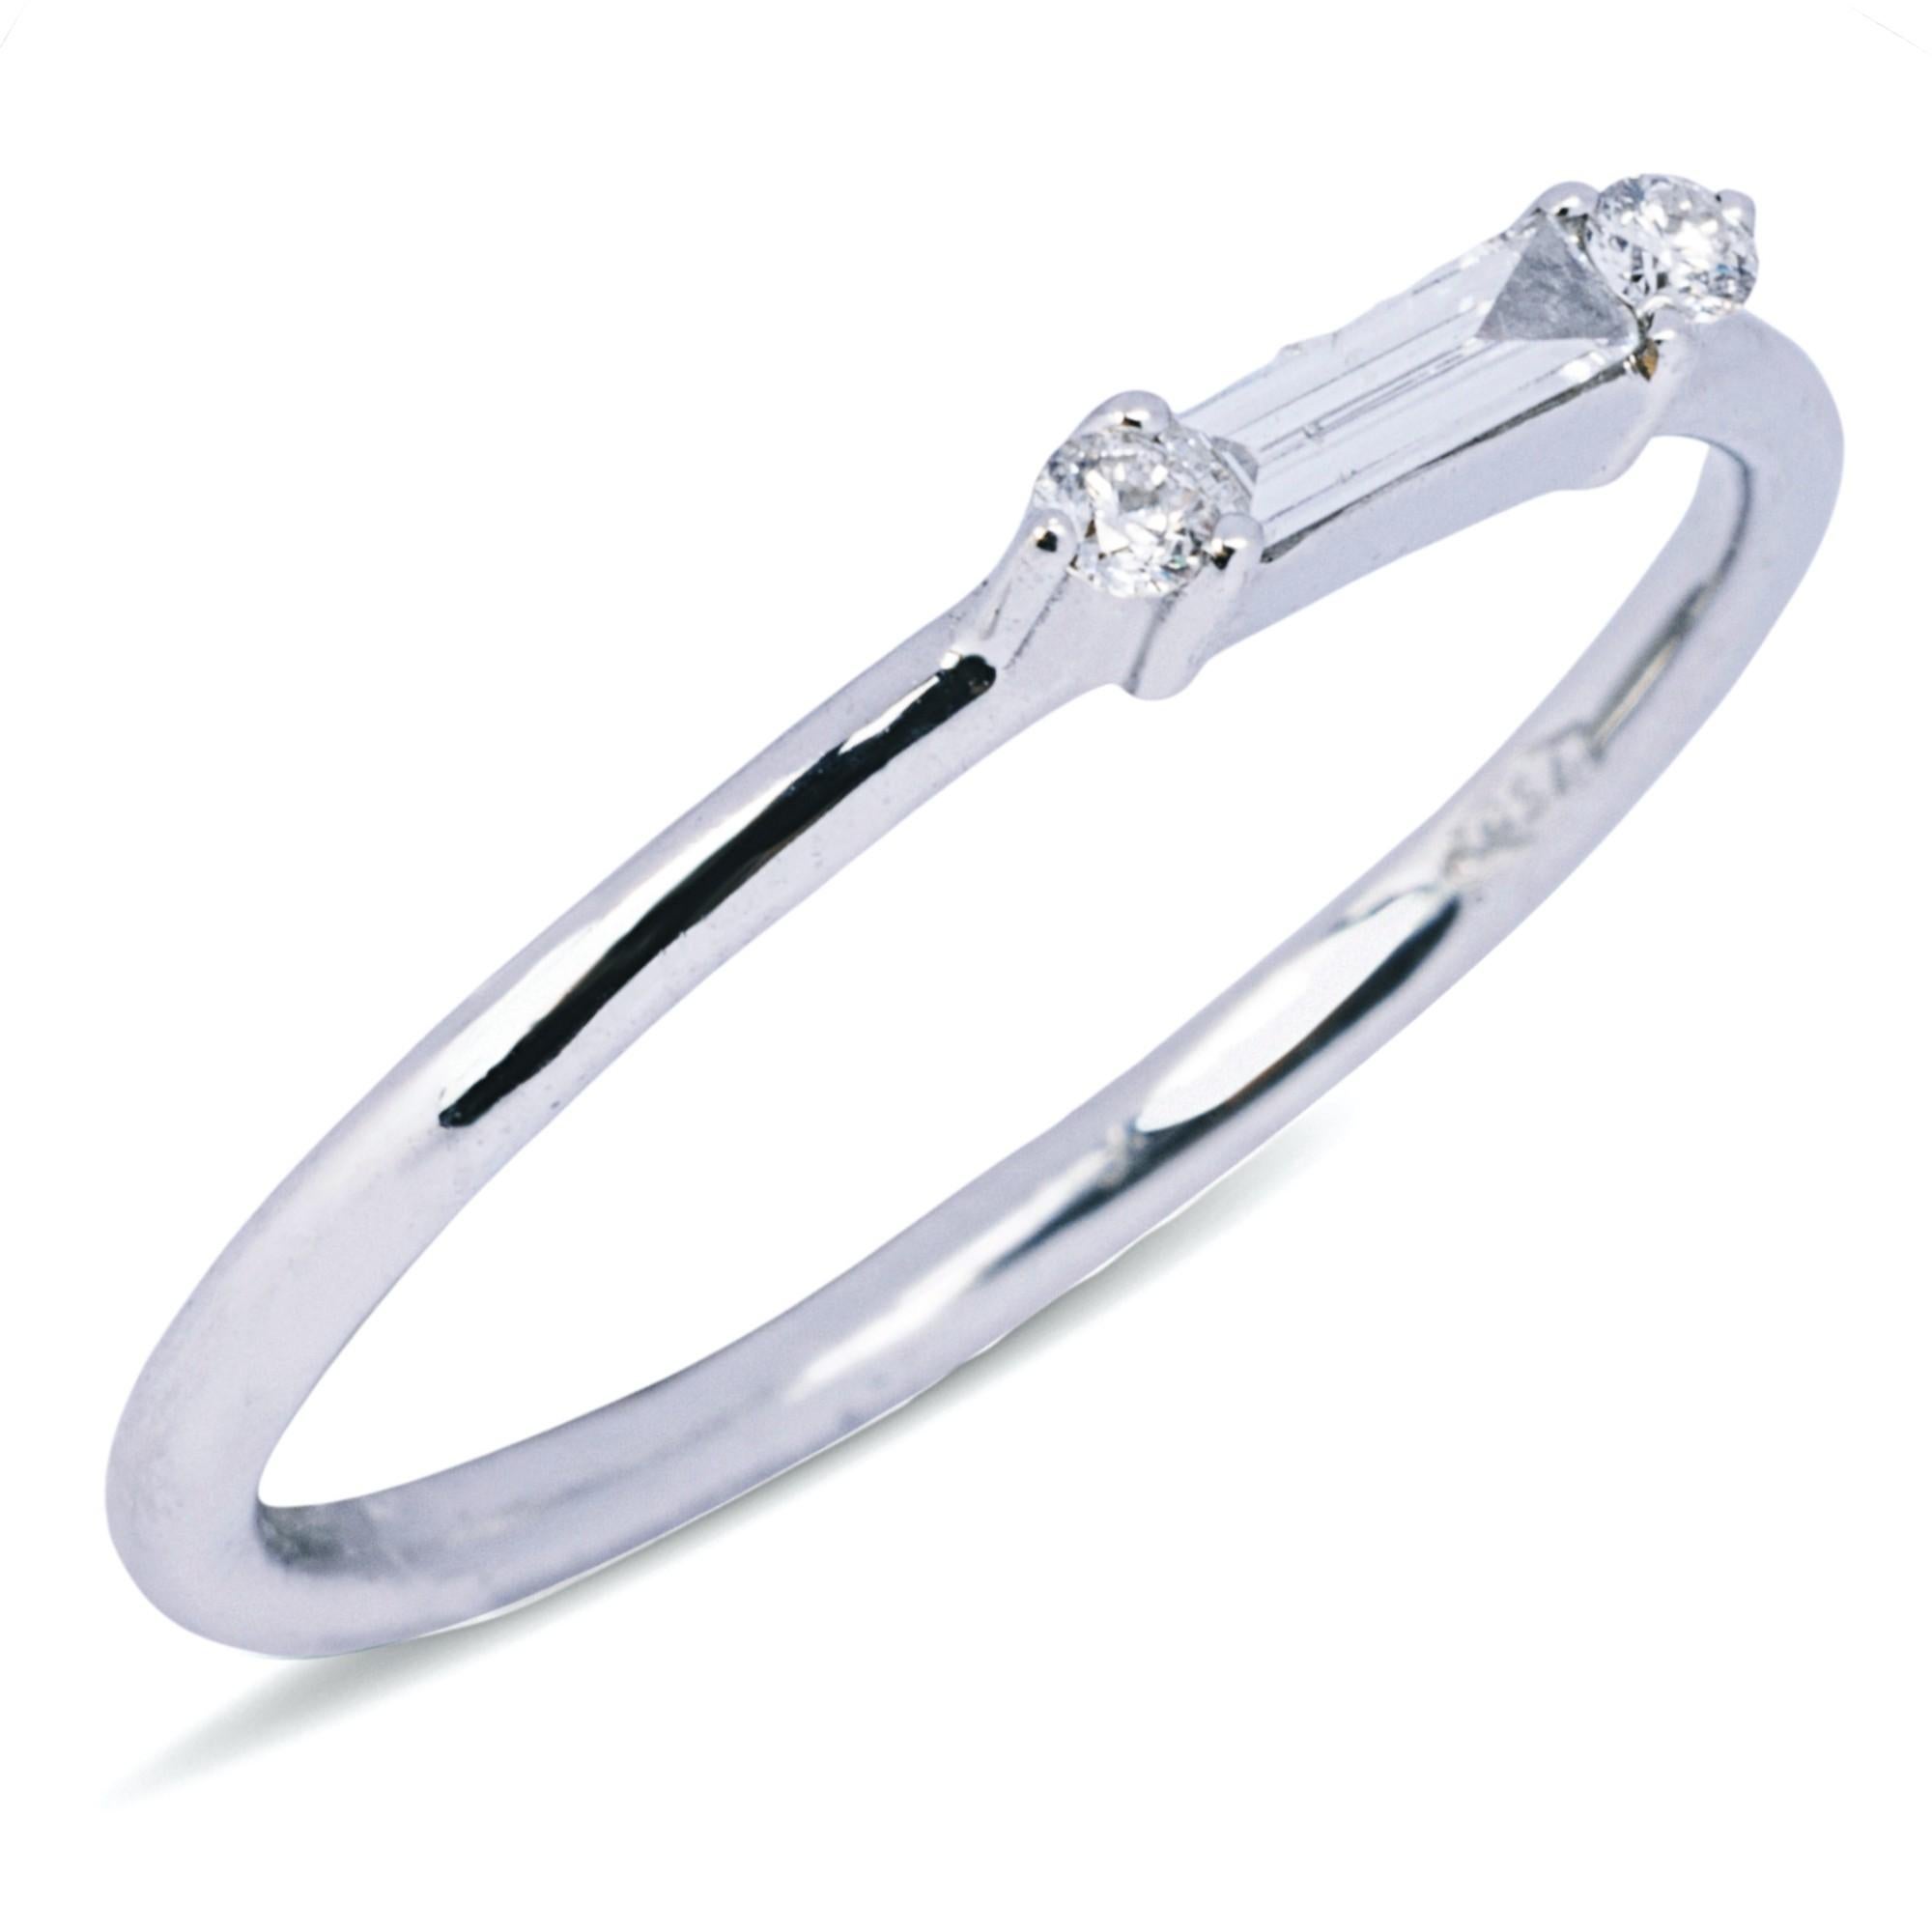 Alex Jona Design collection, hand crafted in Italy, 18 Karat white gold ring centering a baguette cut white diamond,  accented by two round white diamonds, weighing 0.11 total carats, F-G color, VS clarity.
Alex Jona jewels stand out, not only for